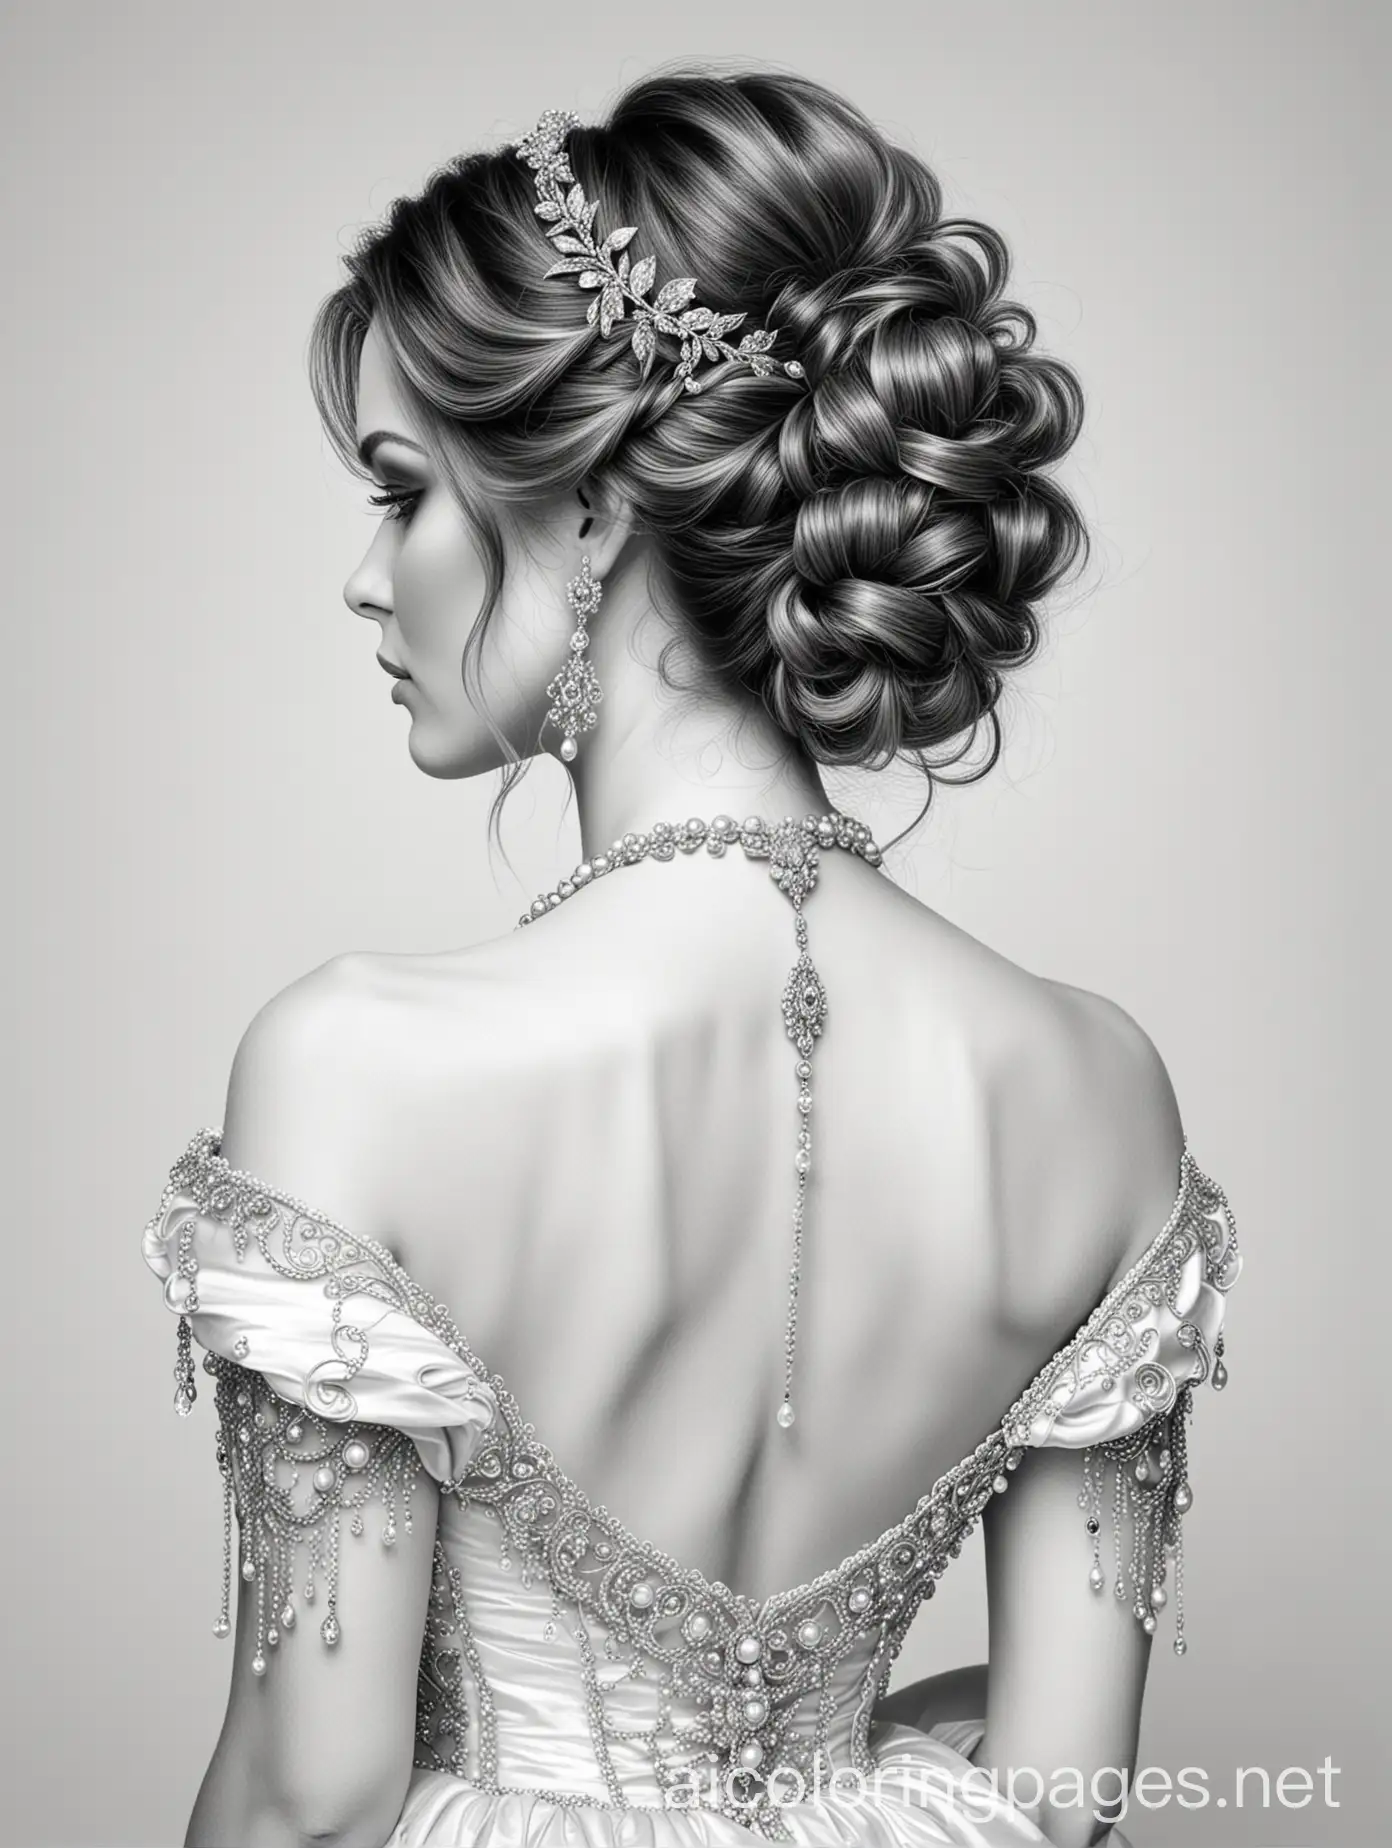 back view of a woman wearing fancy jewelry and Bridgerton updo hairstyle with long wavey hair and pearls and a fancy dress, Coloring Page, black and white, line art, white background, Simplicity, Ample White Space. The background of the coloring page is plain white to make it easy for young children to color within the lines. The outlines of all the subjects are easy to distinguish, making it simple for kids to color without too much difficulty